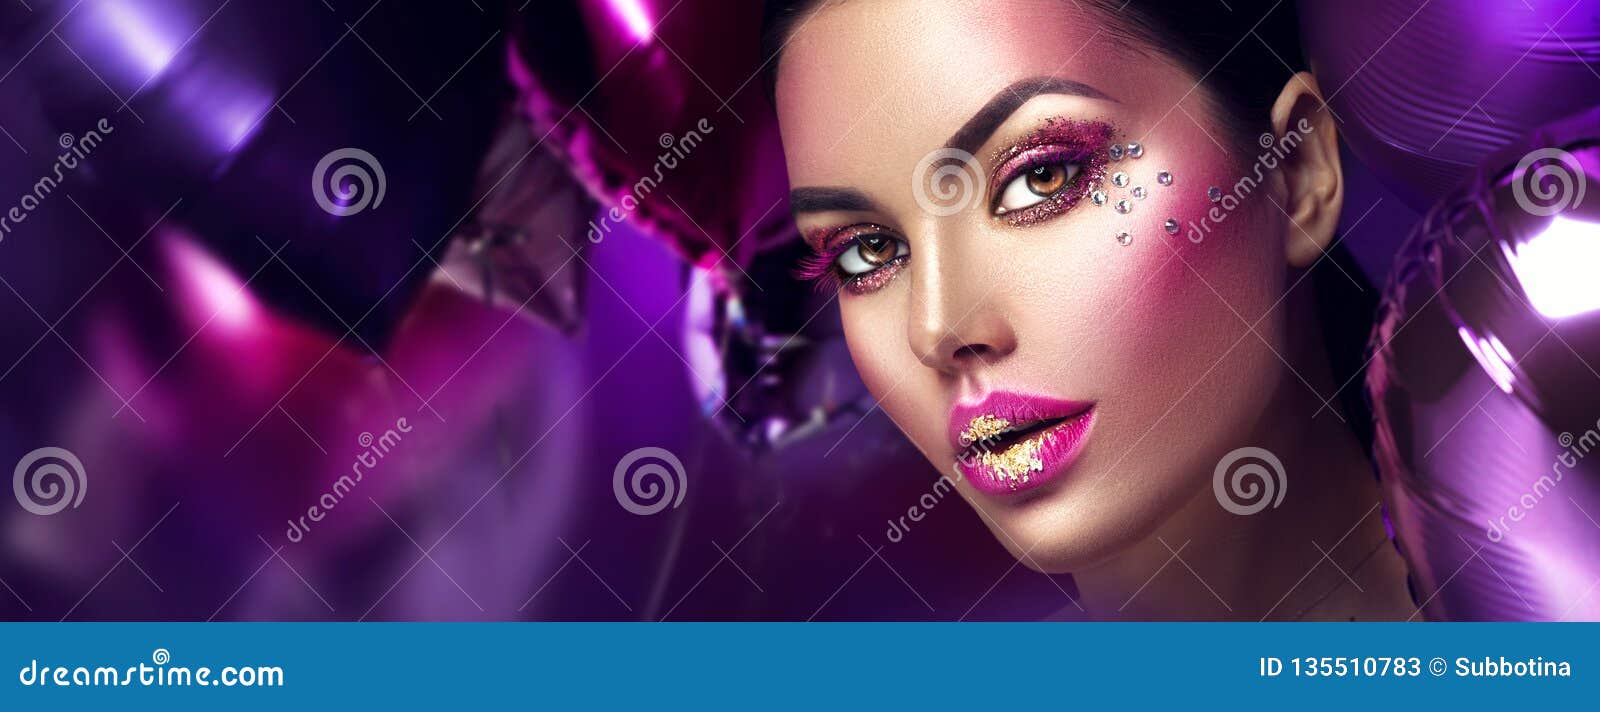 beauty fashion model girl creative art makeup with gems. woman face over purple, pink and violet air balloons